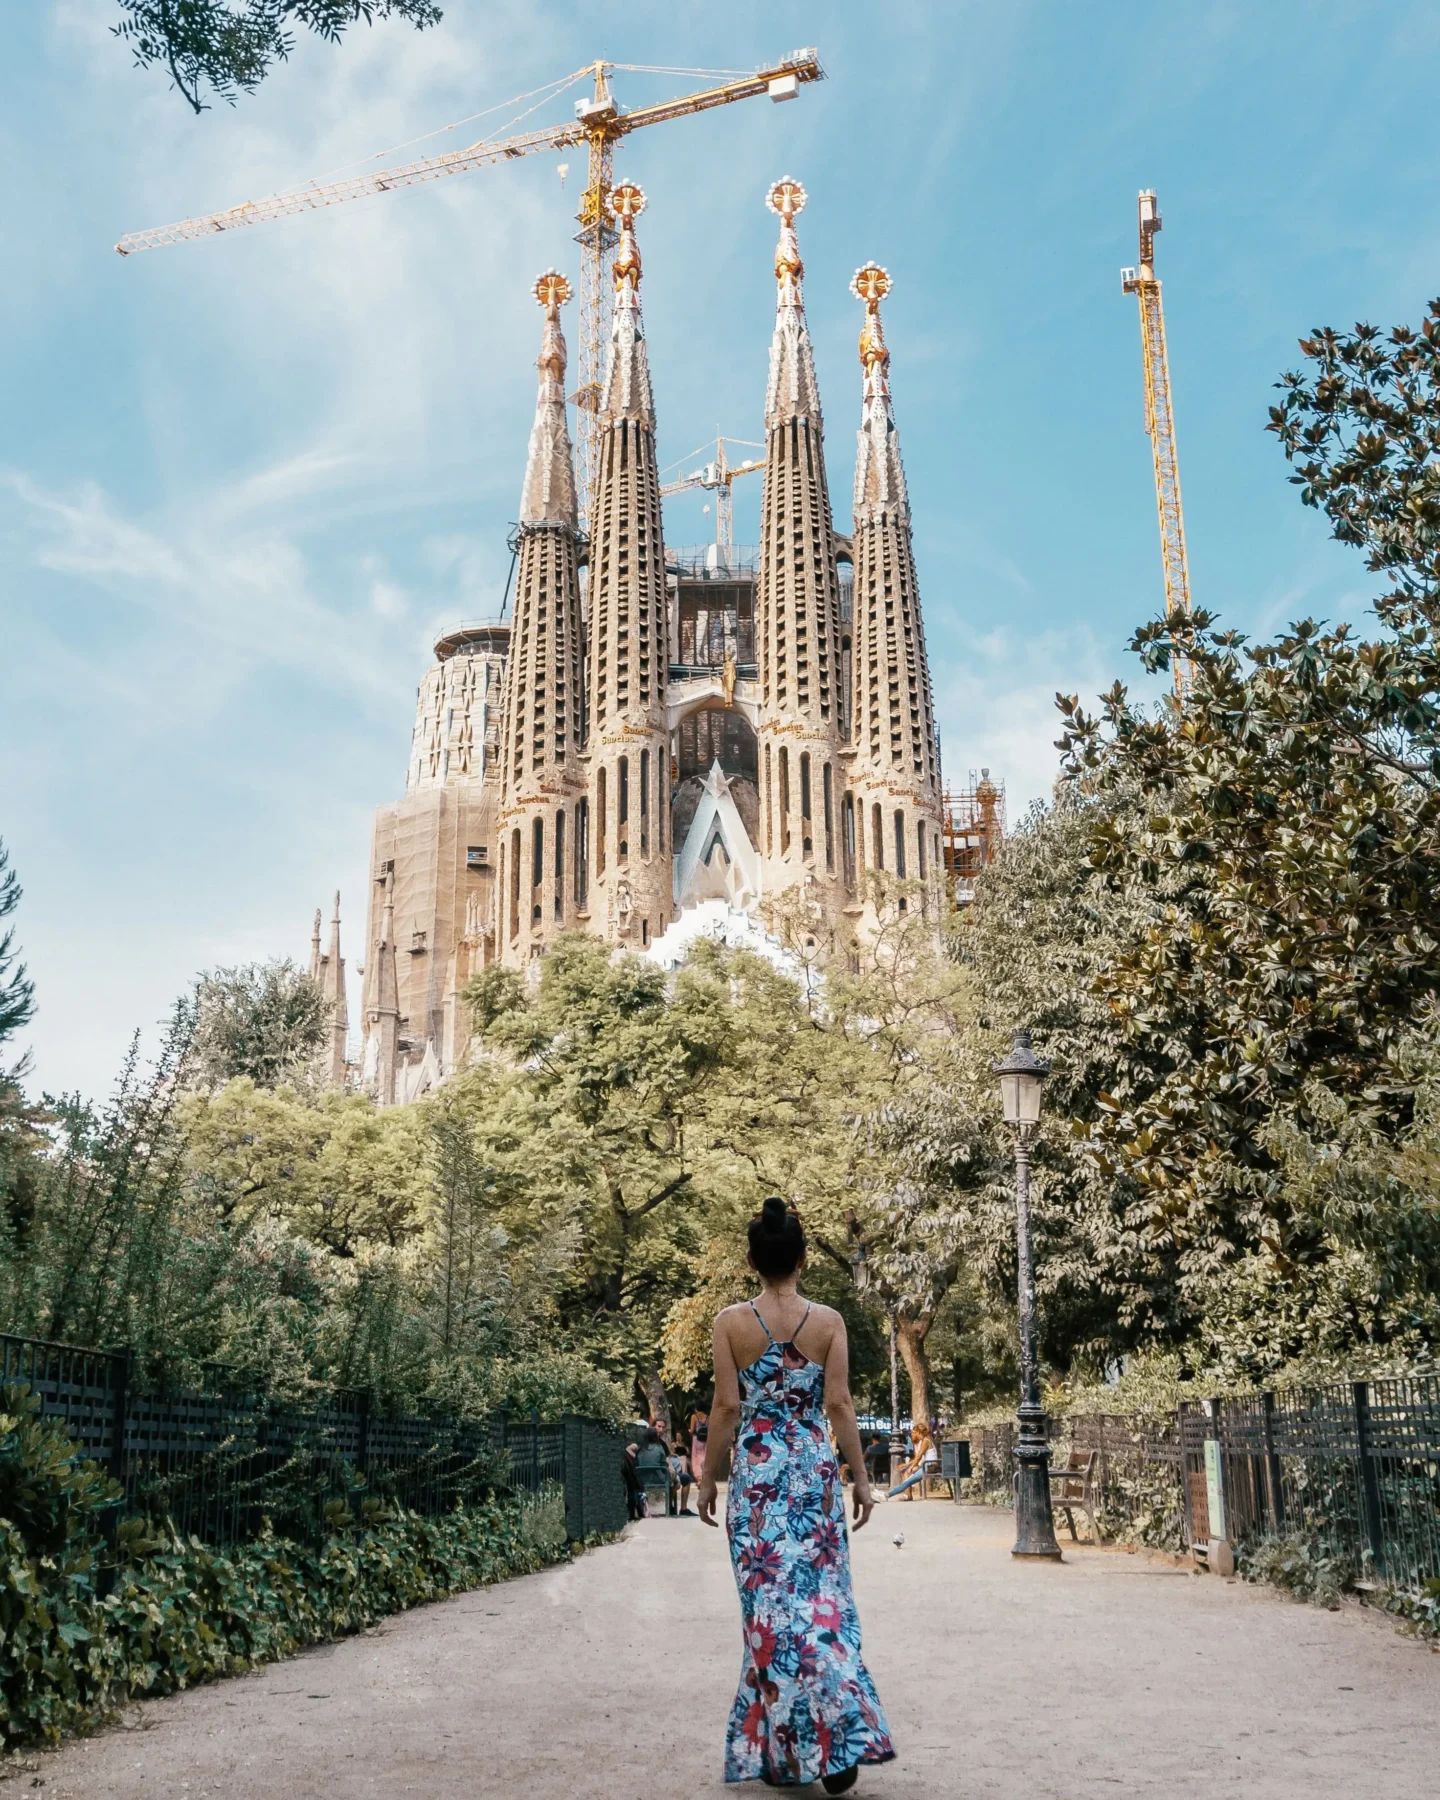 Barcelona Travel Tip 9: Visit the Major Tourist Attractions Early